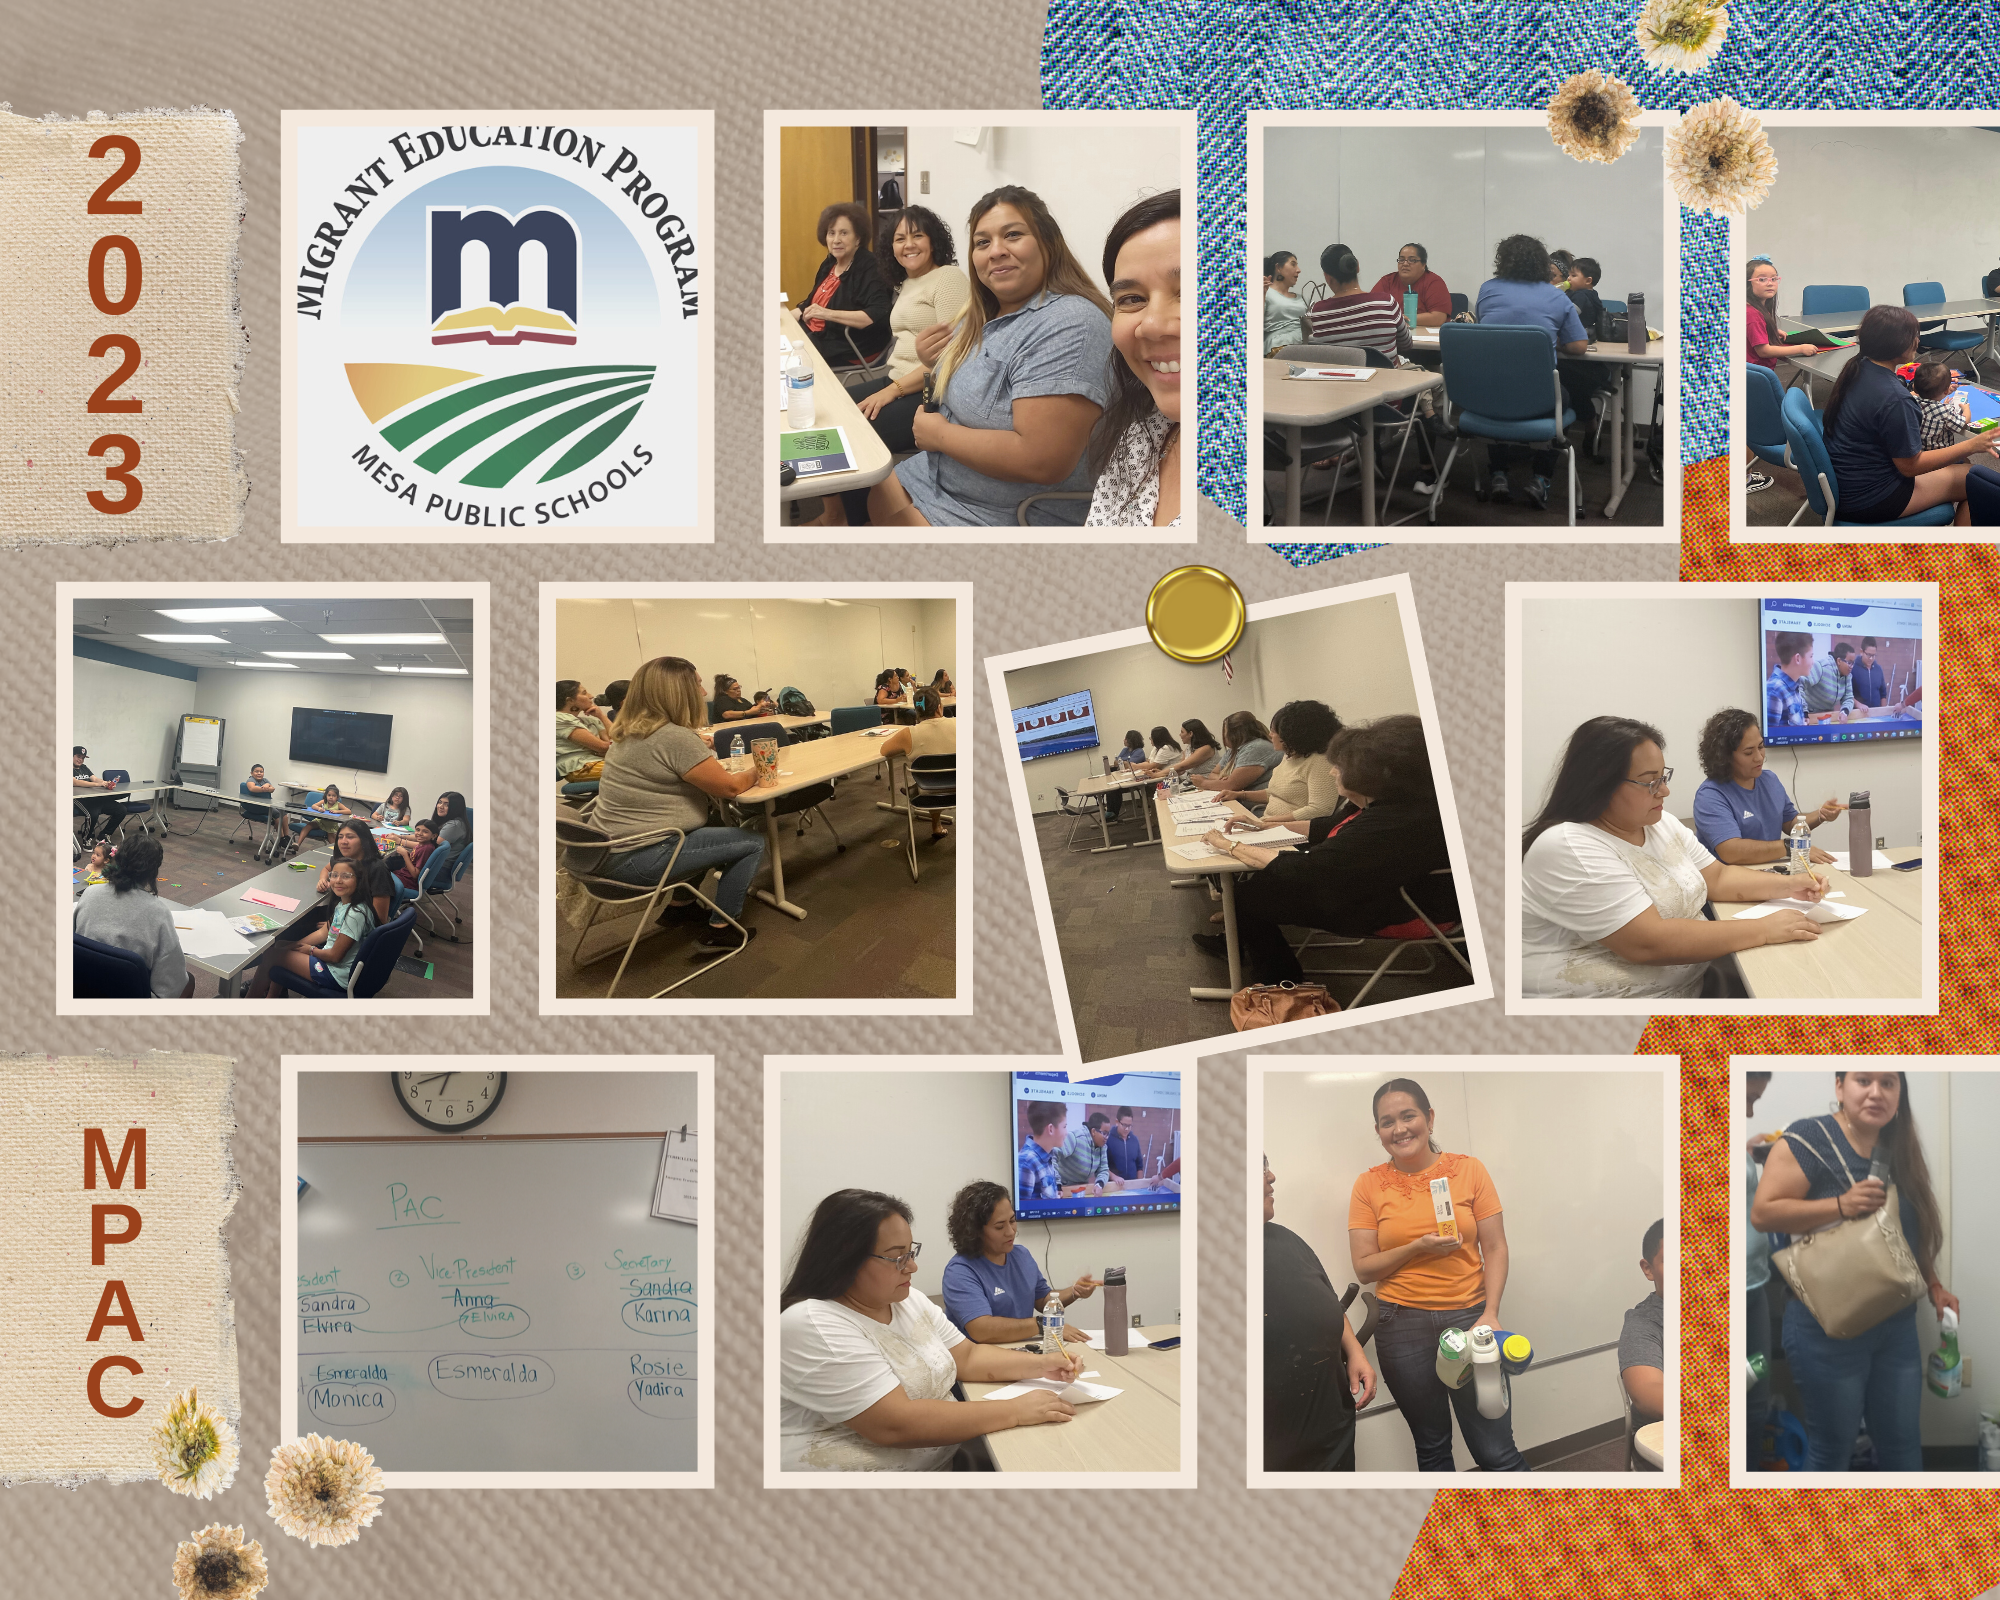 Collage of parent meetings from the Migrant Education Program at Mesa Public Schools